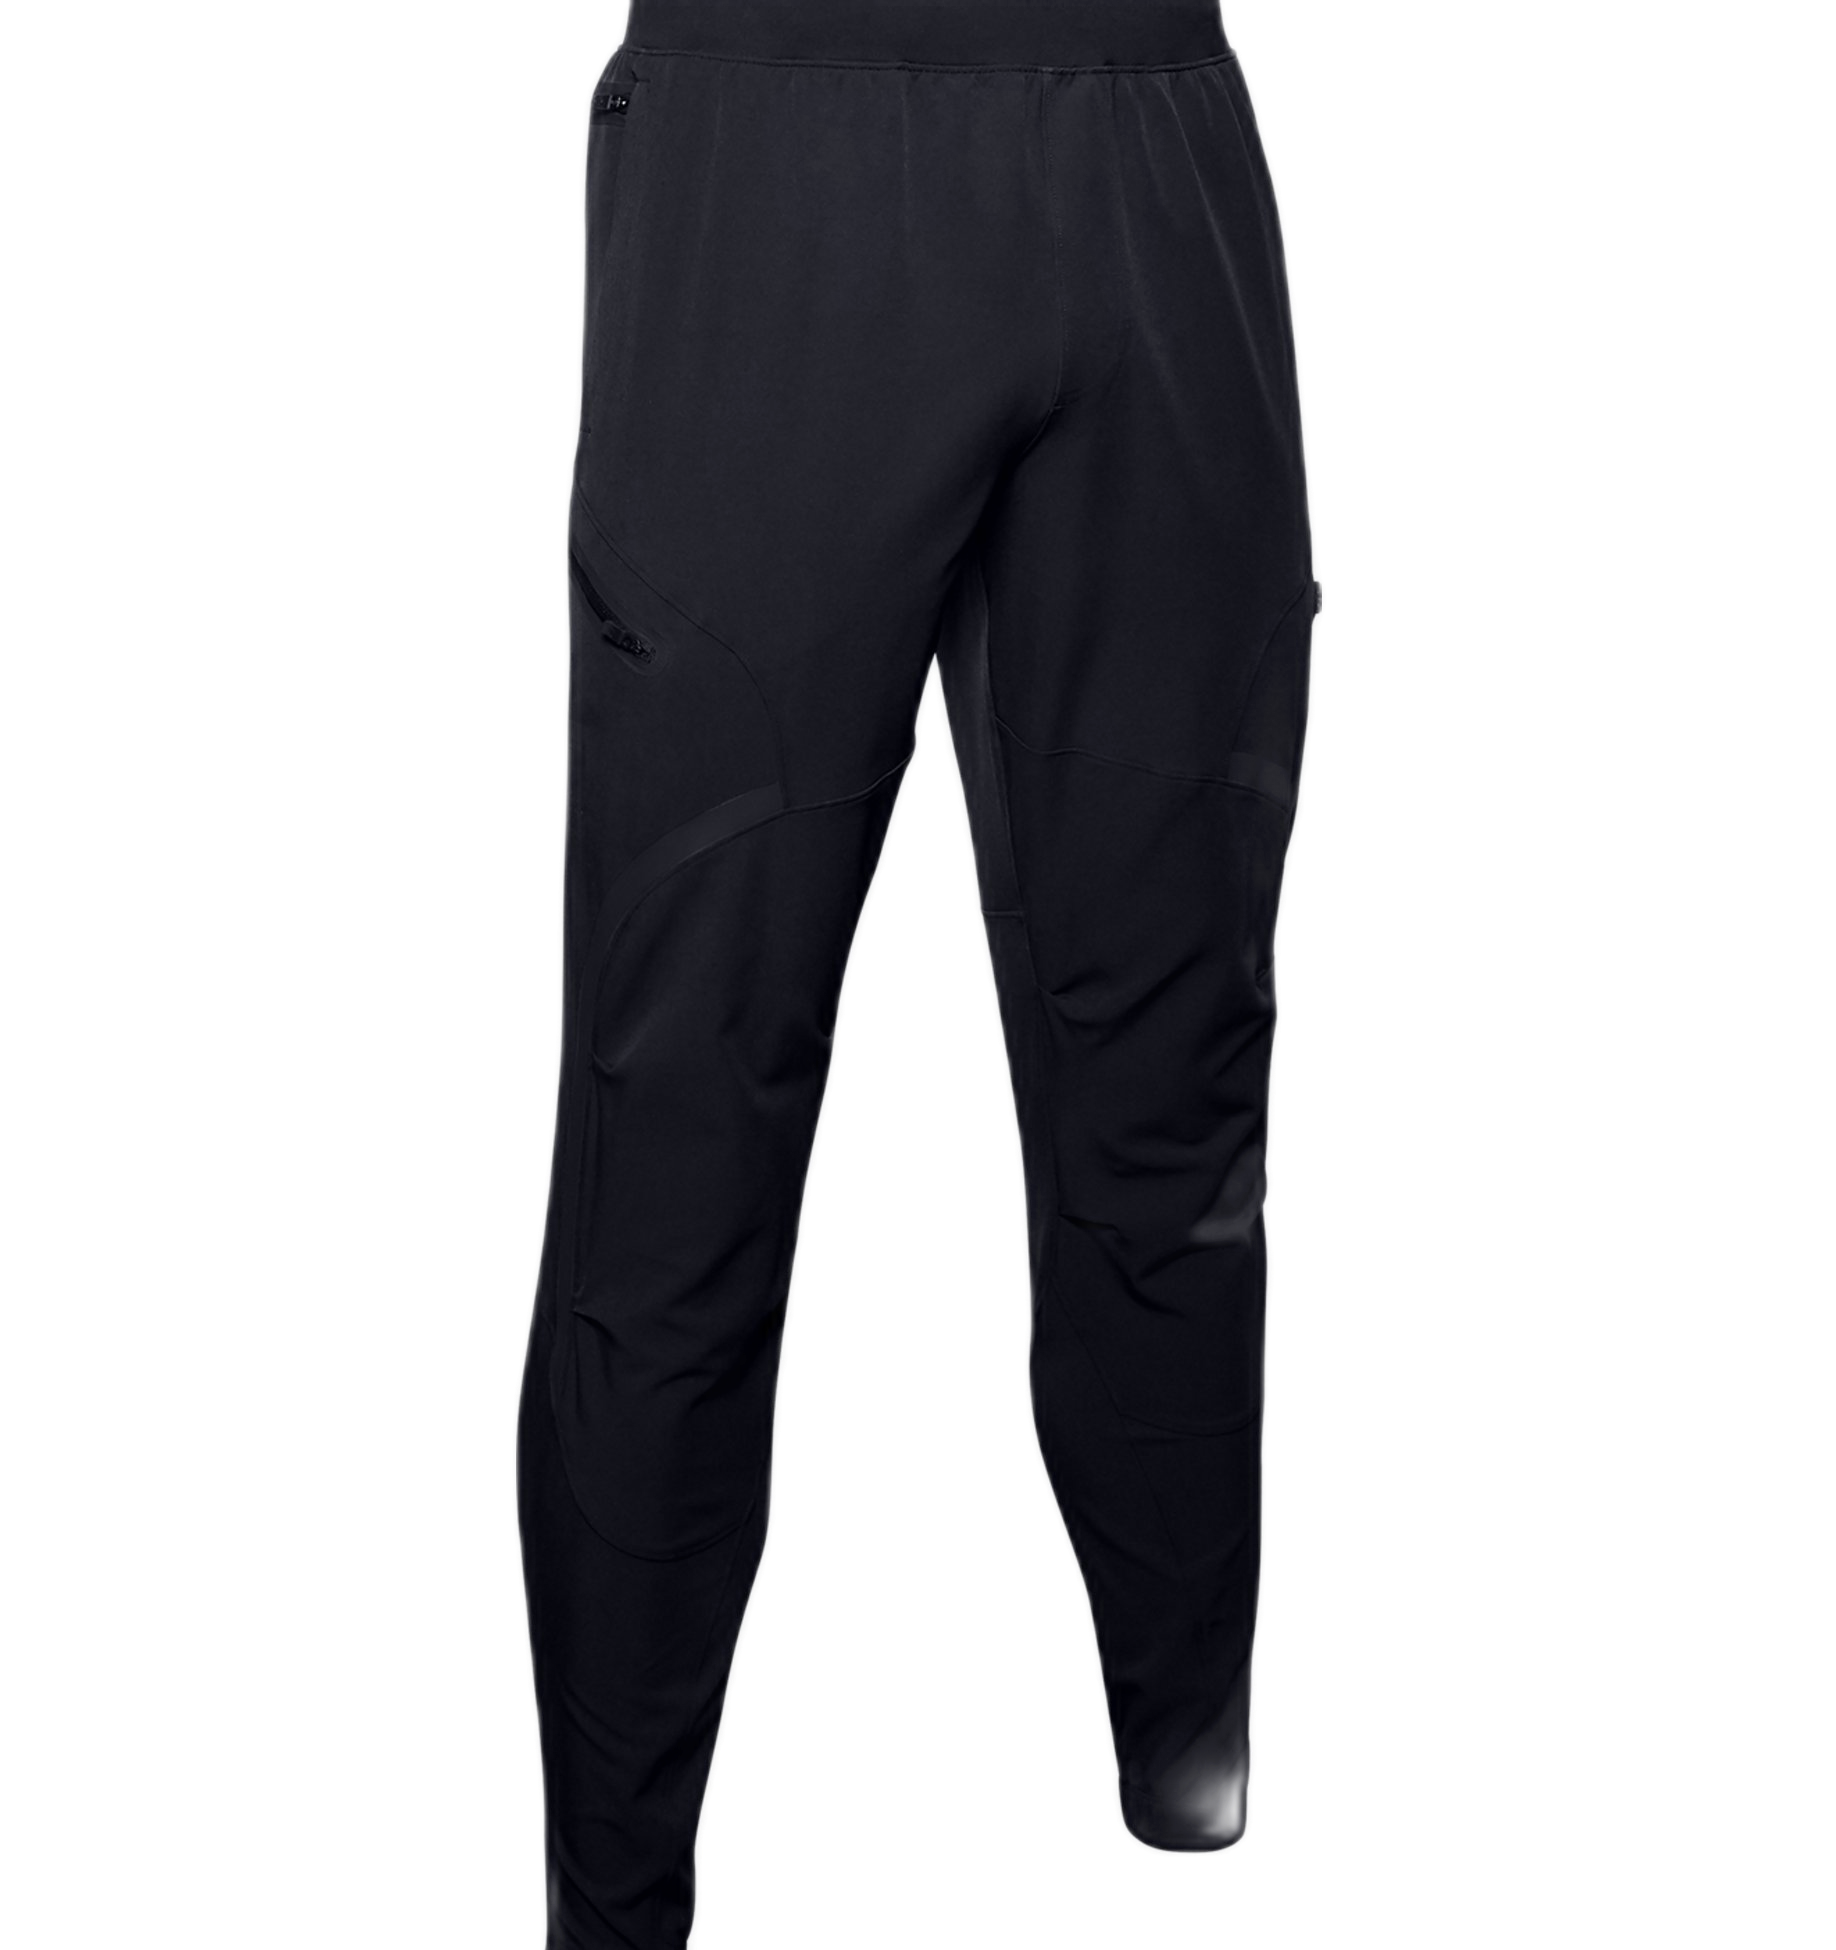 Under Armour Unstoppable Cargo Pants Black